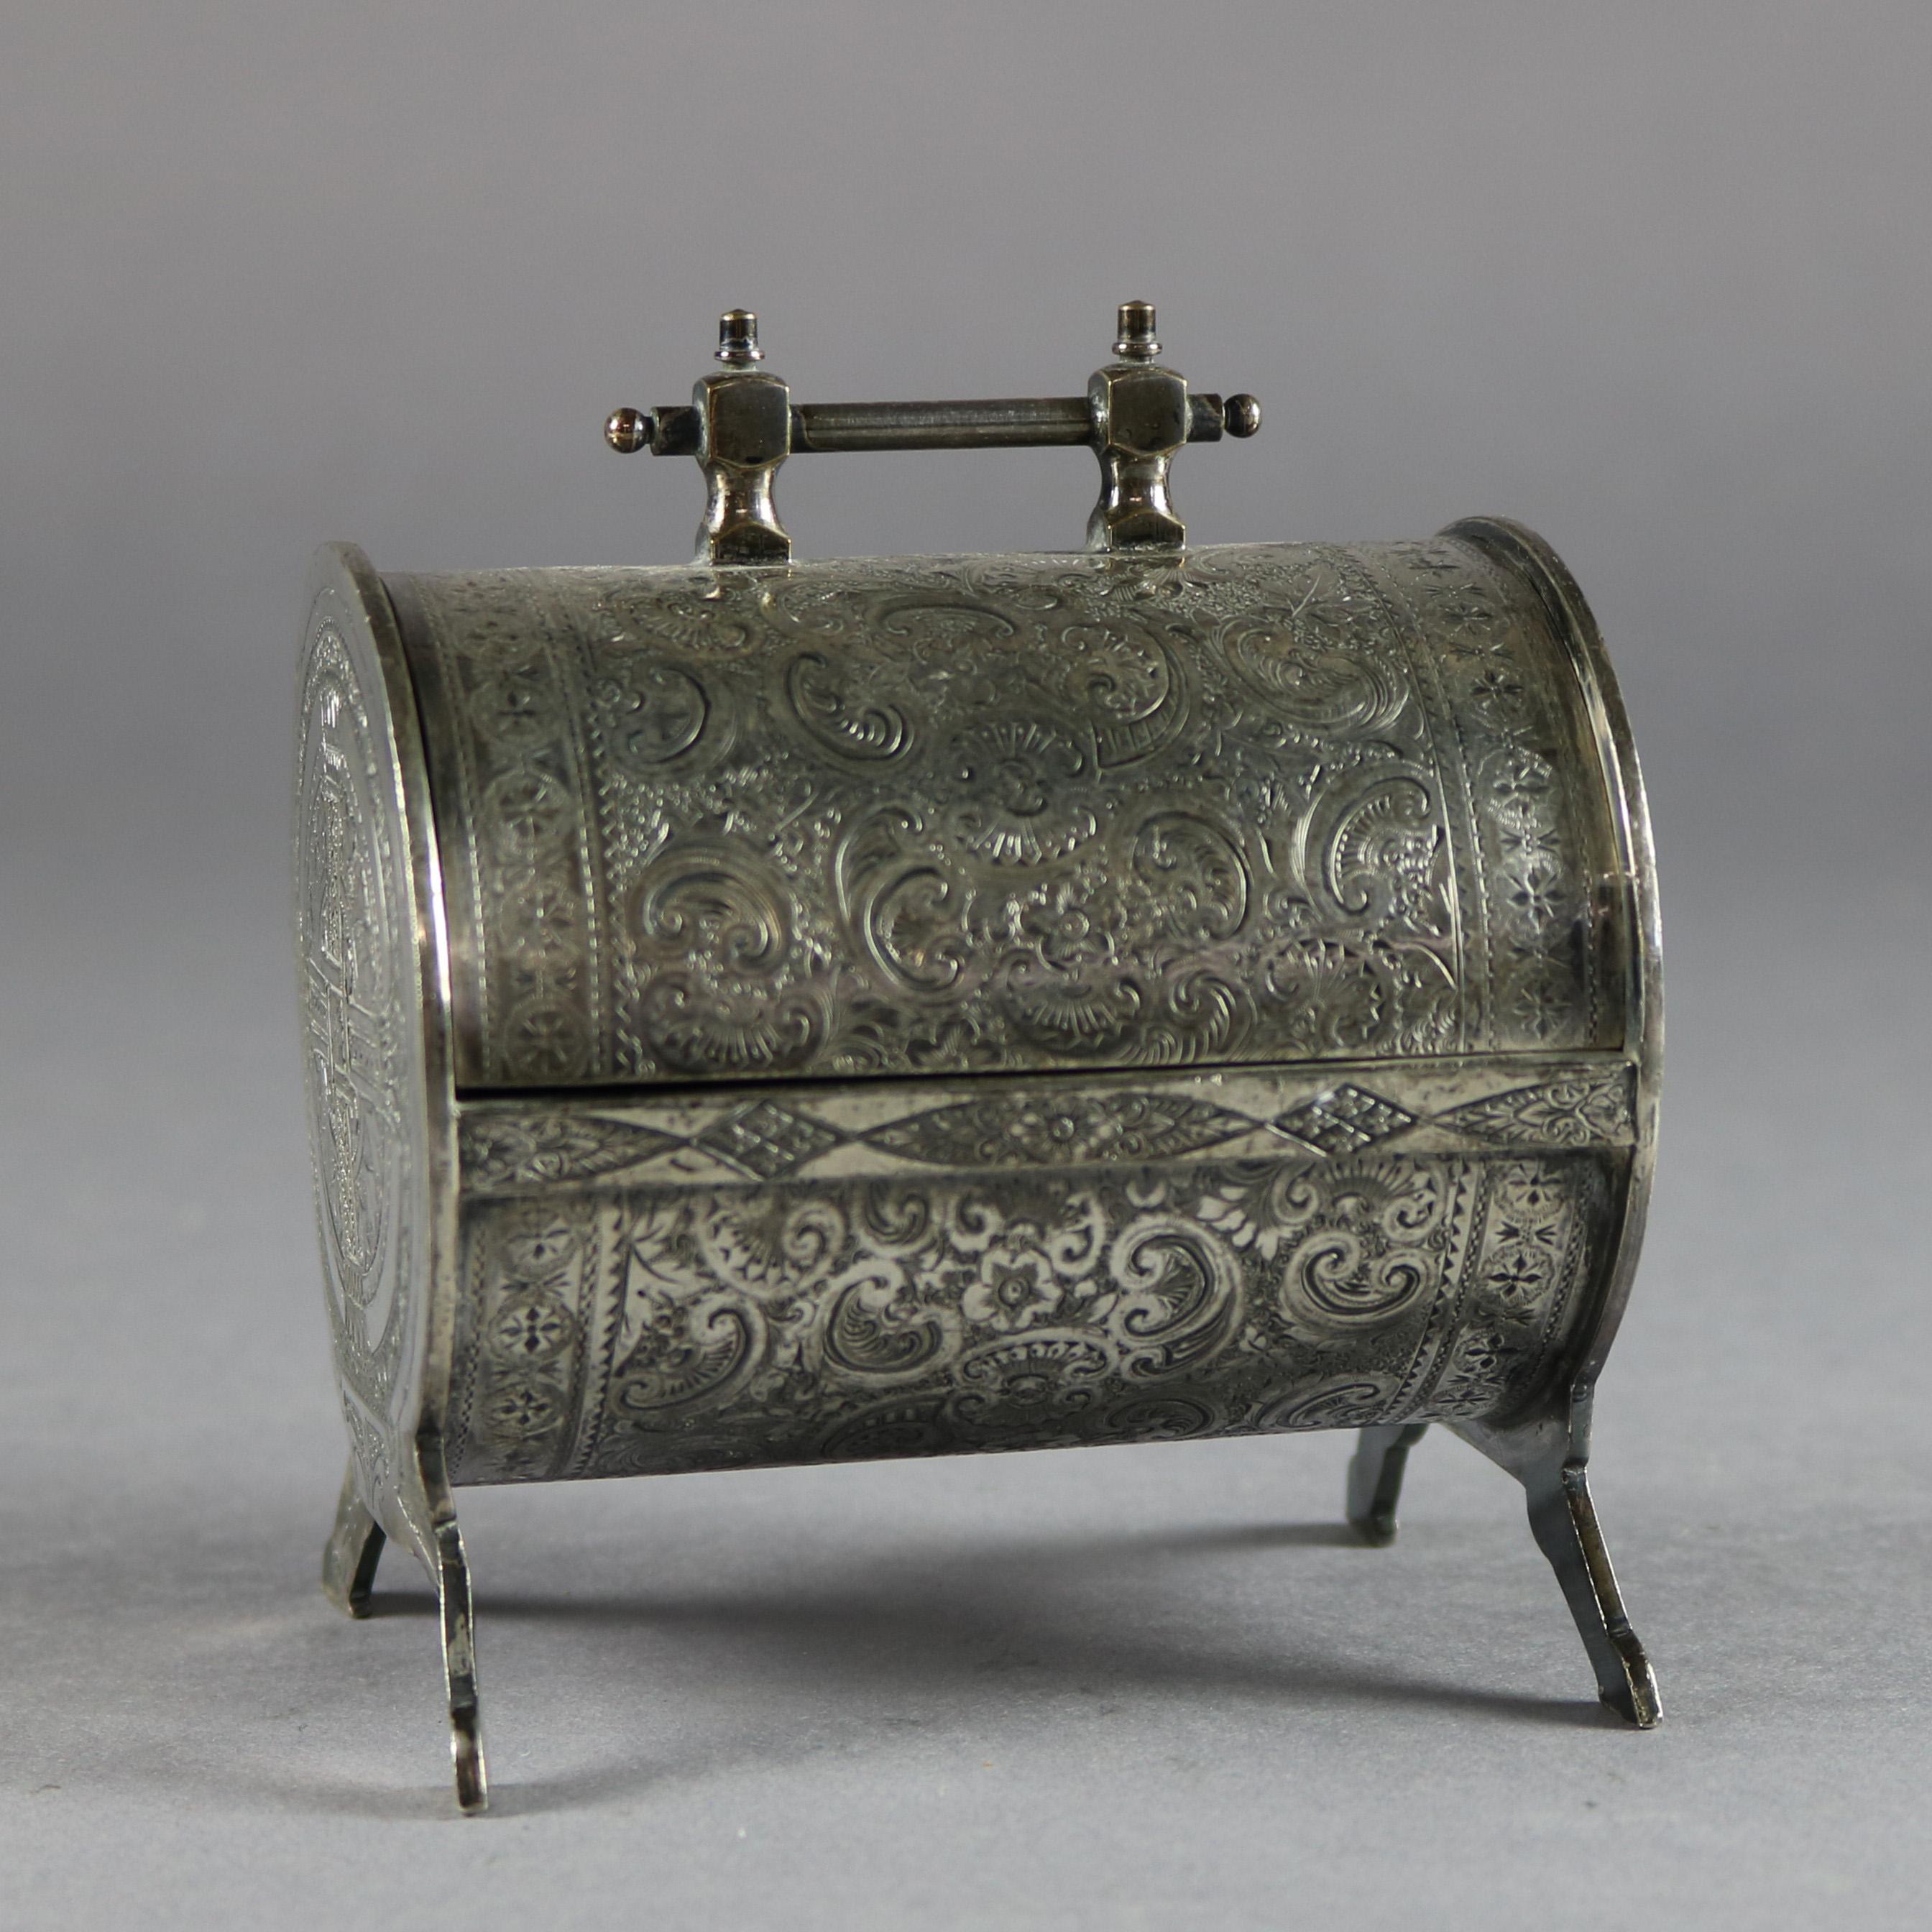 Etched Antique Irish Victorian Silver Plate Felt Lined & Footed Casket, circa 1880